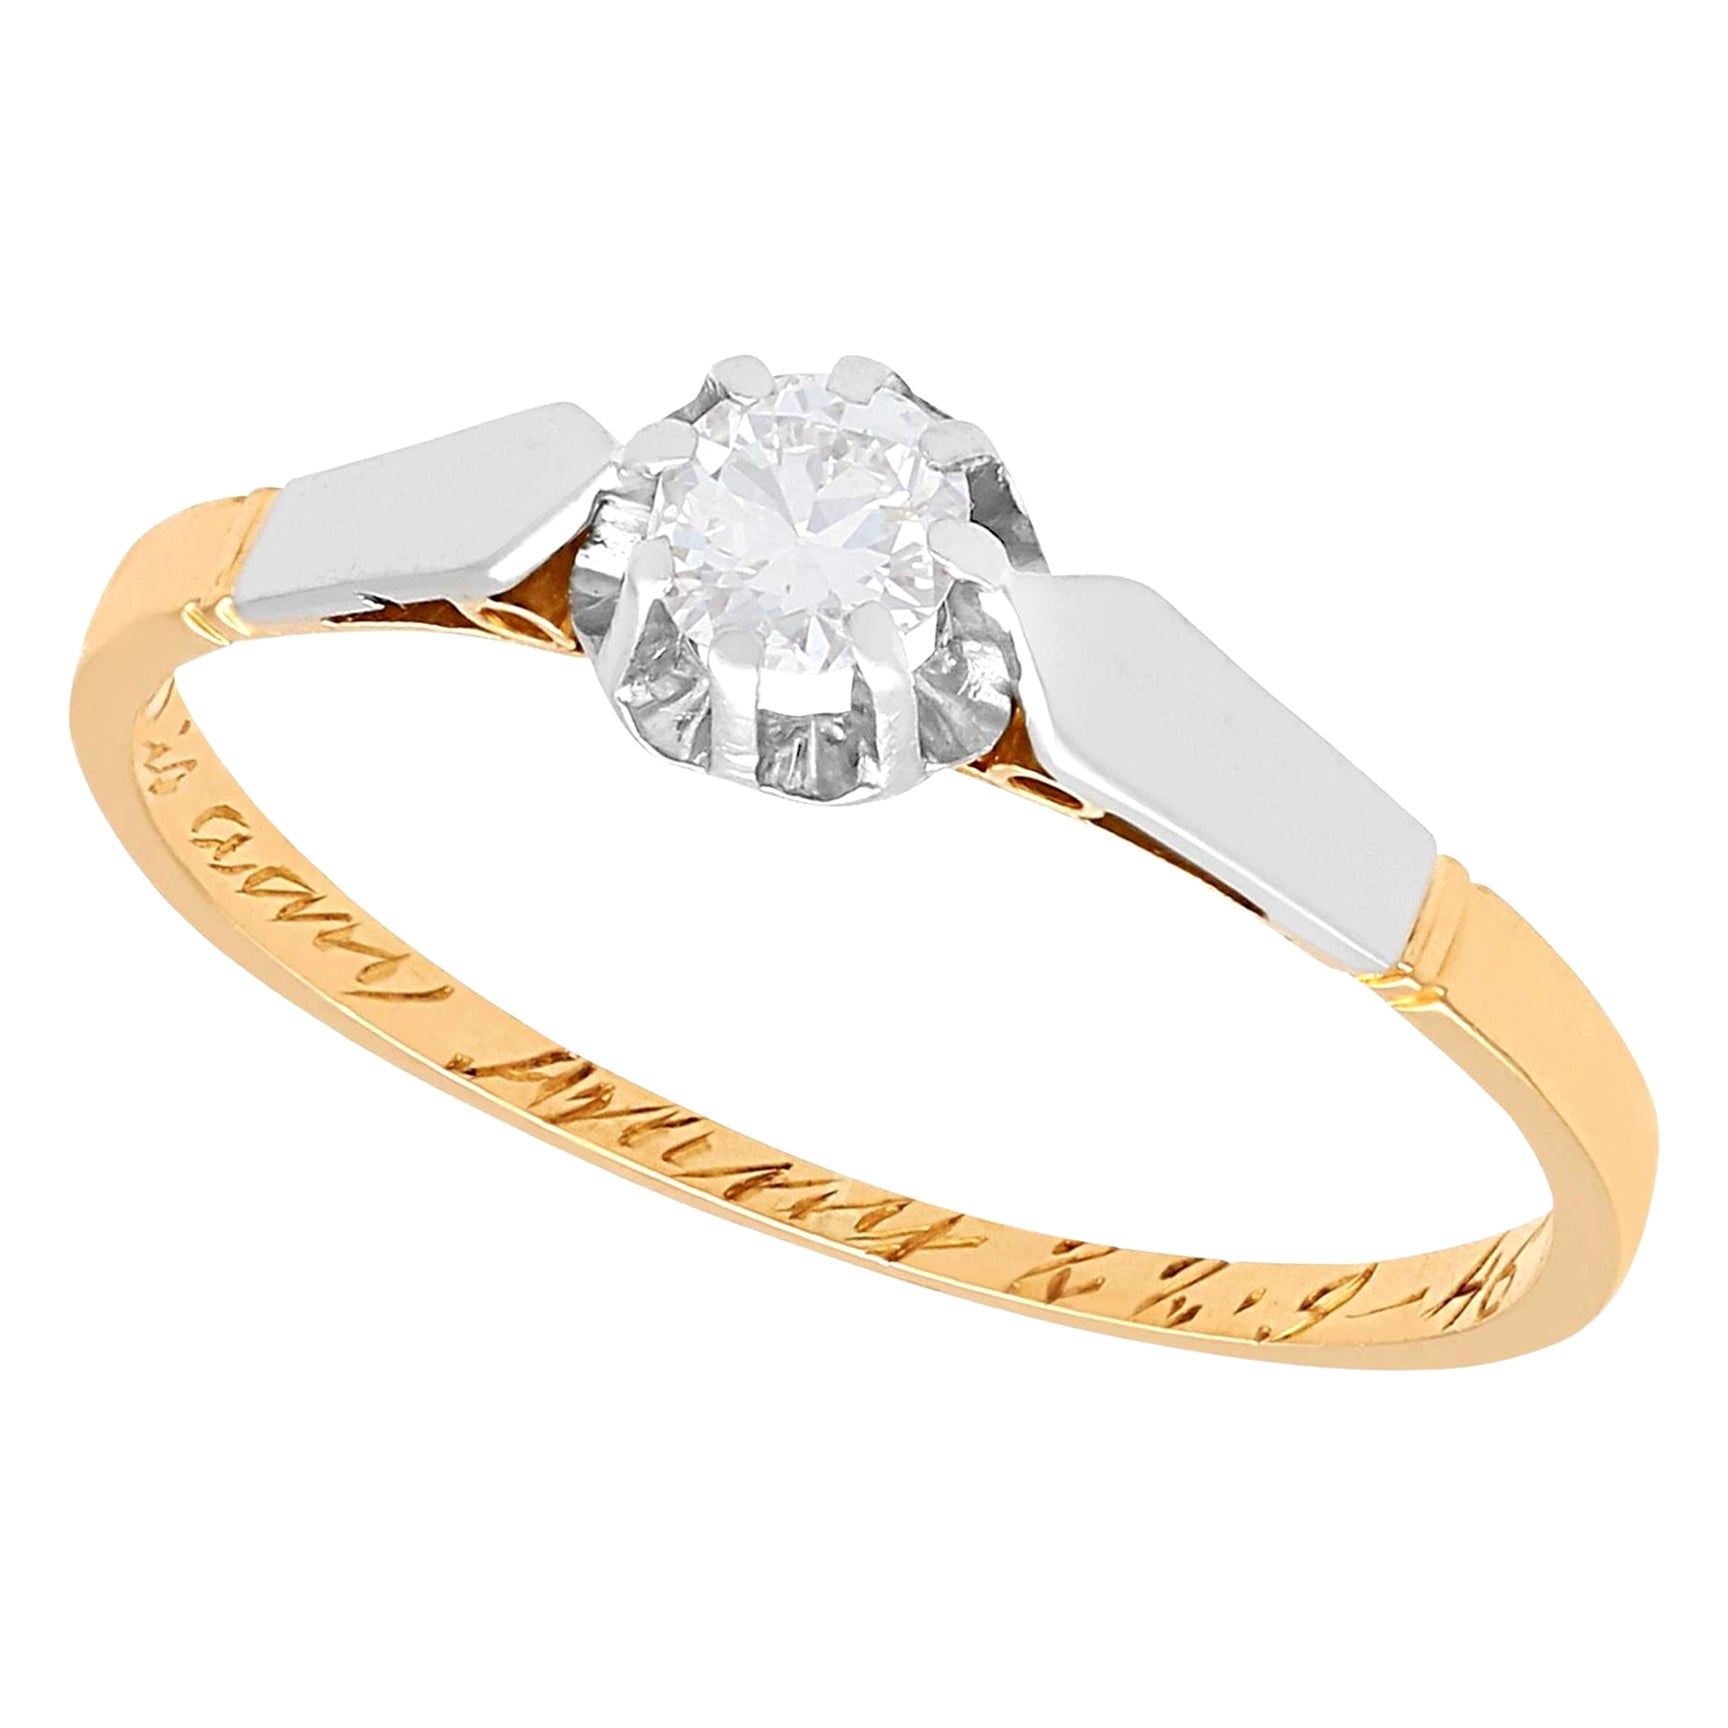 1940s Diamond and Yellow Gold Solitaire Engagement Ring